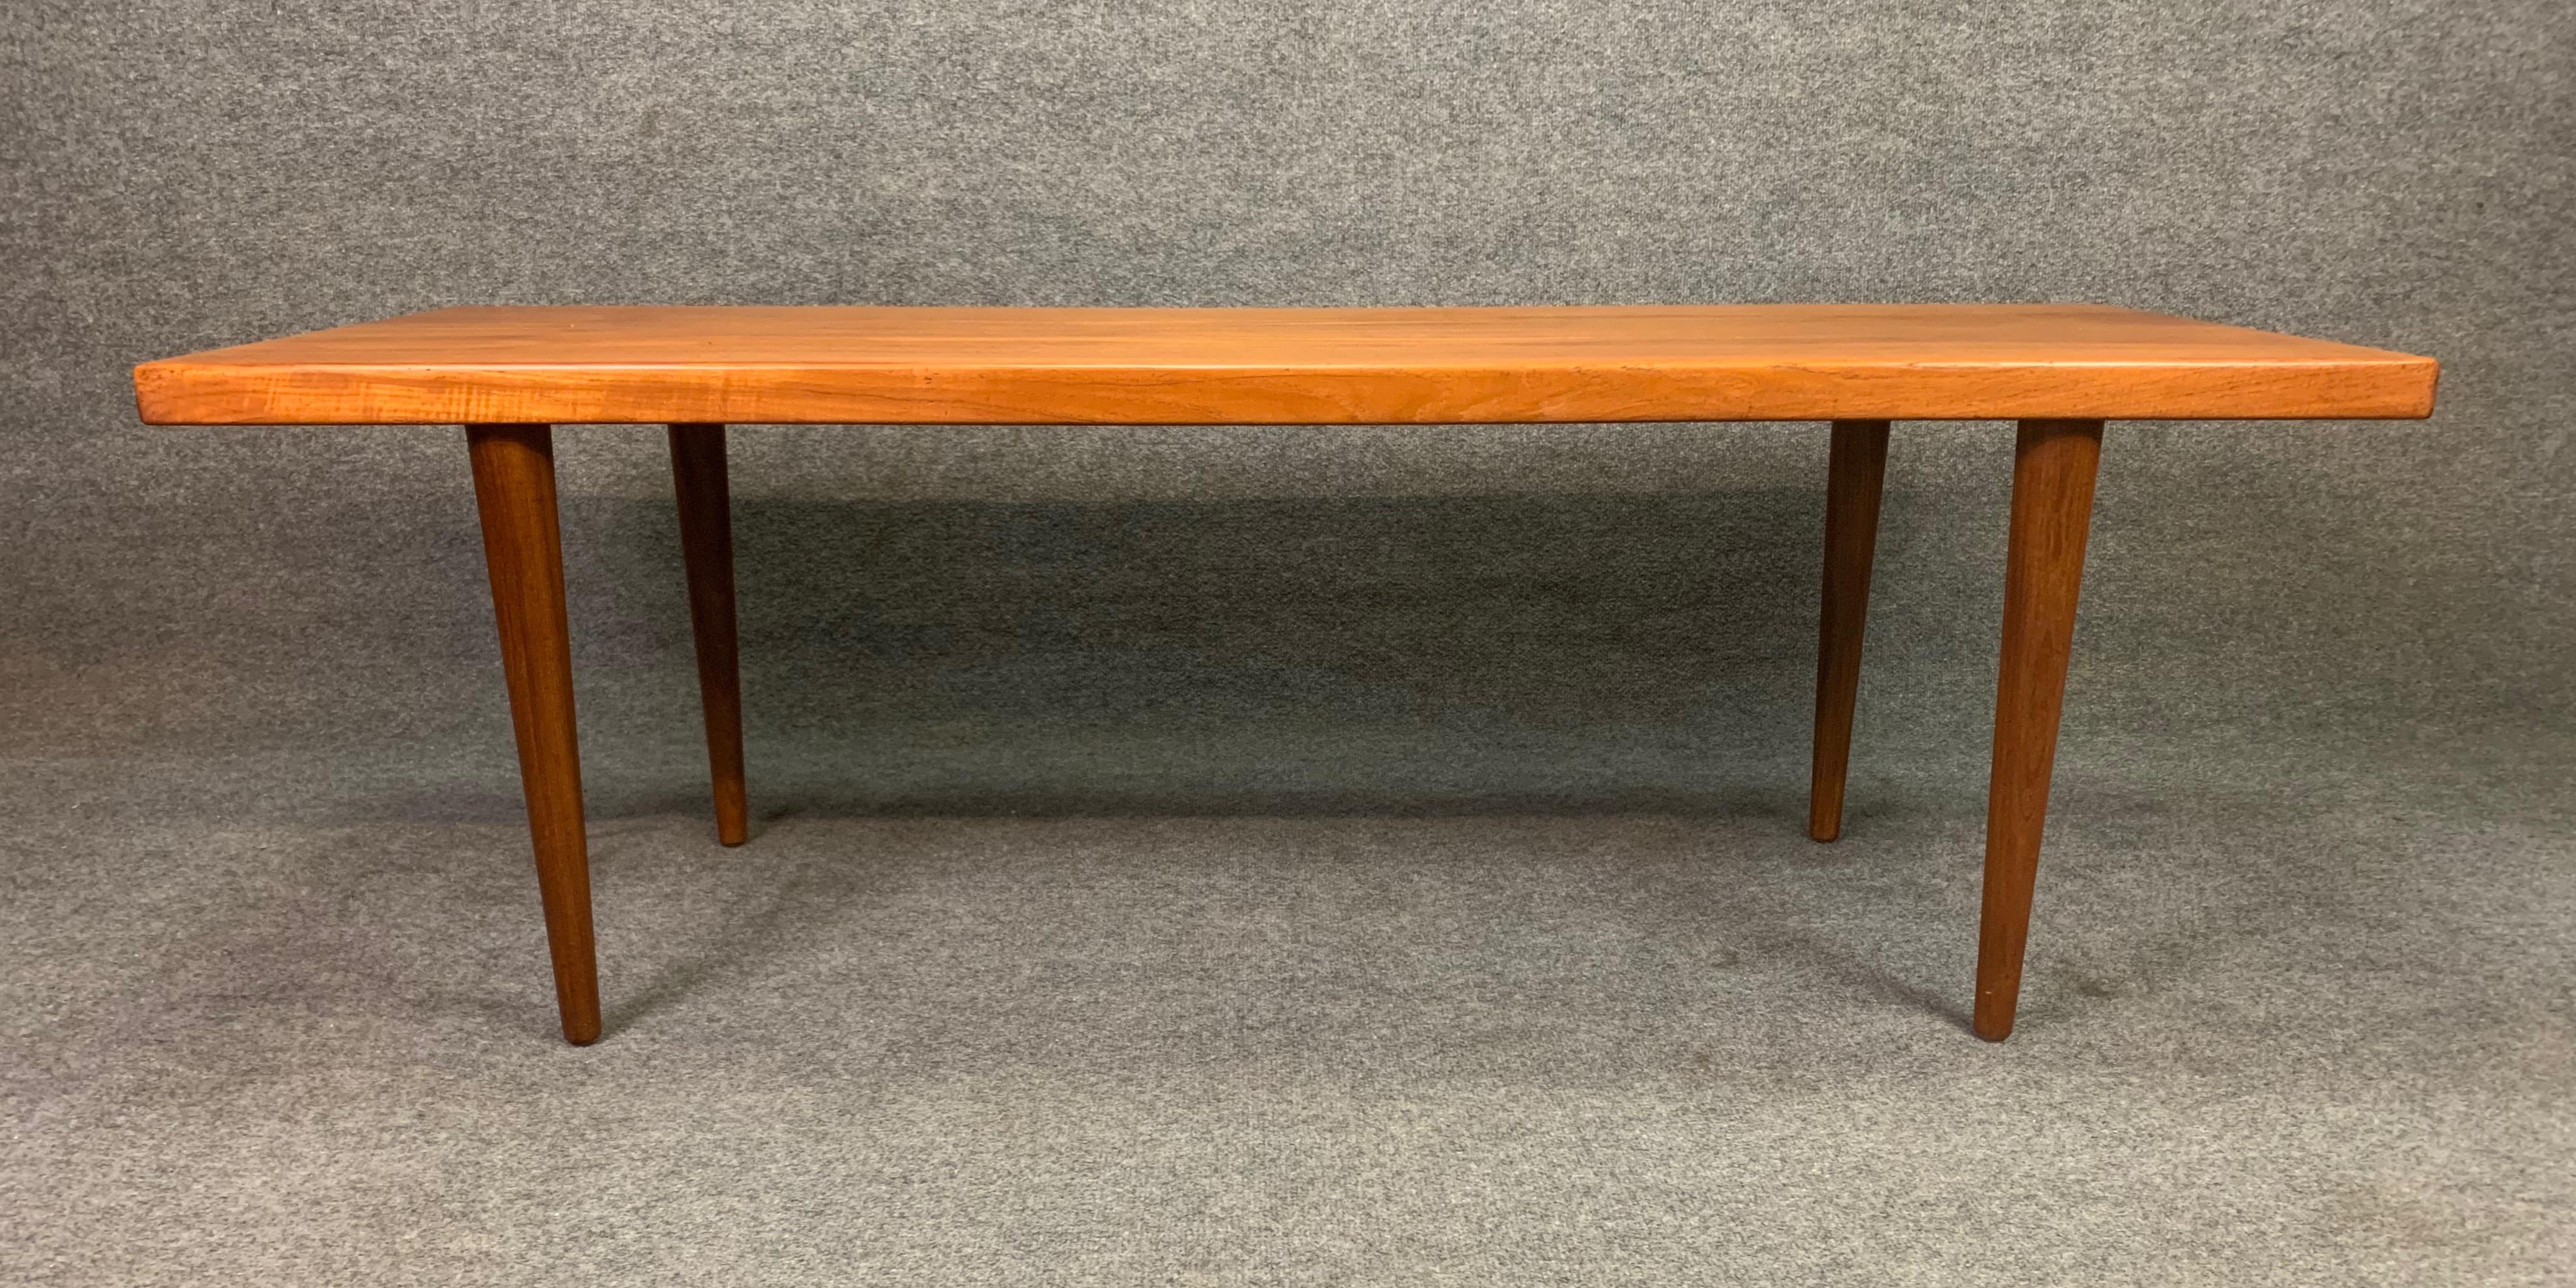 Here is a beautiful 1960s Minimalist surfboard coffee table in teak wood recently imported from Denmark to California before its restoration.
This table features a large top with vibrant wood grain details and rests on four solid tapered teak